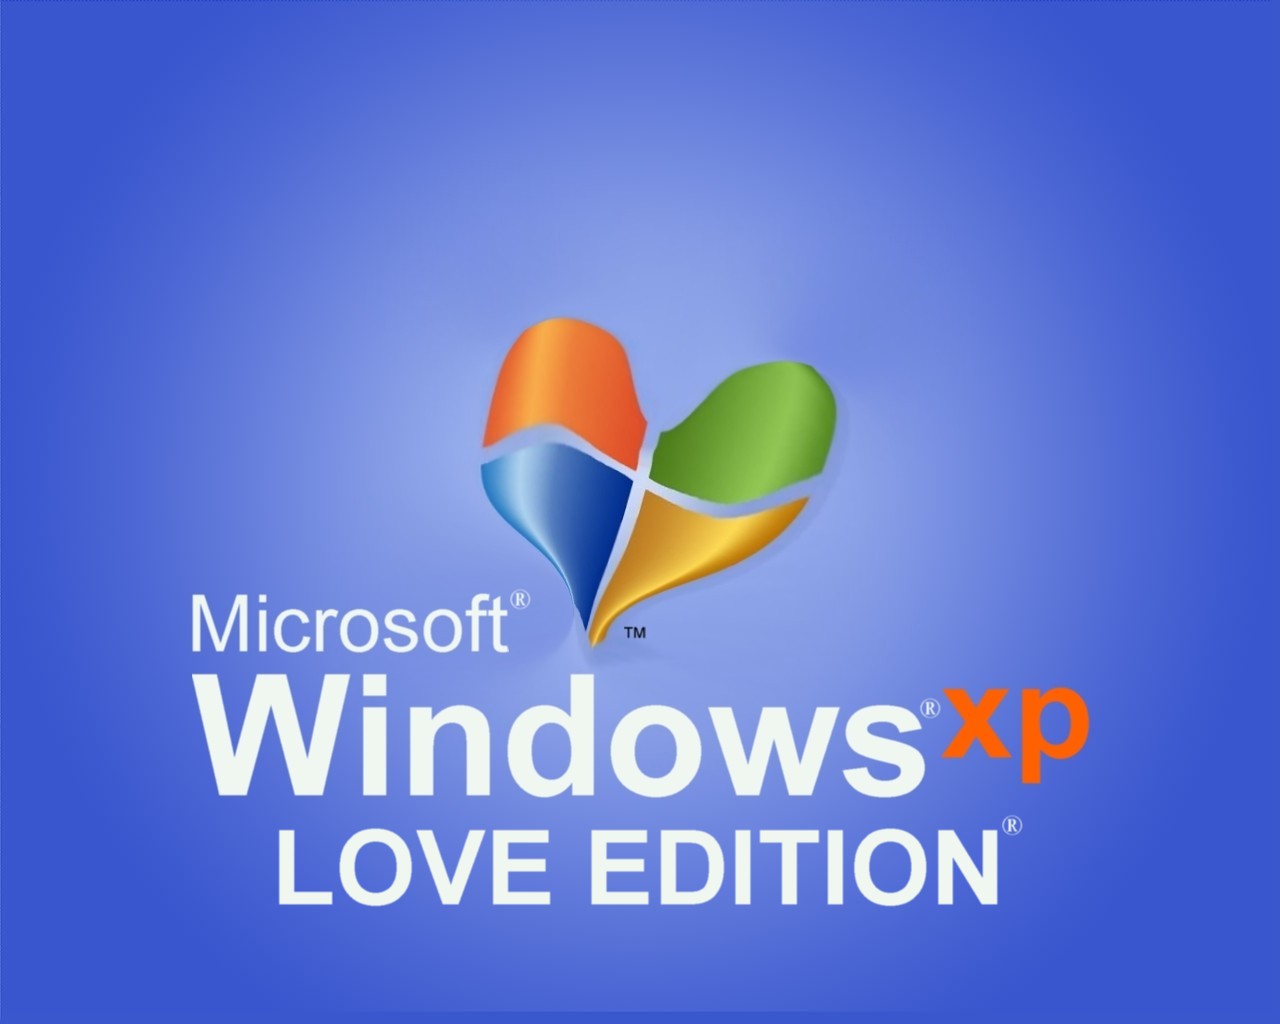 Wallpaper Puter For Windows Xp Love Edition